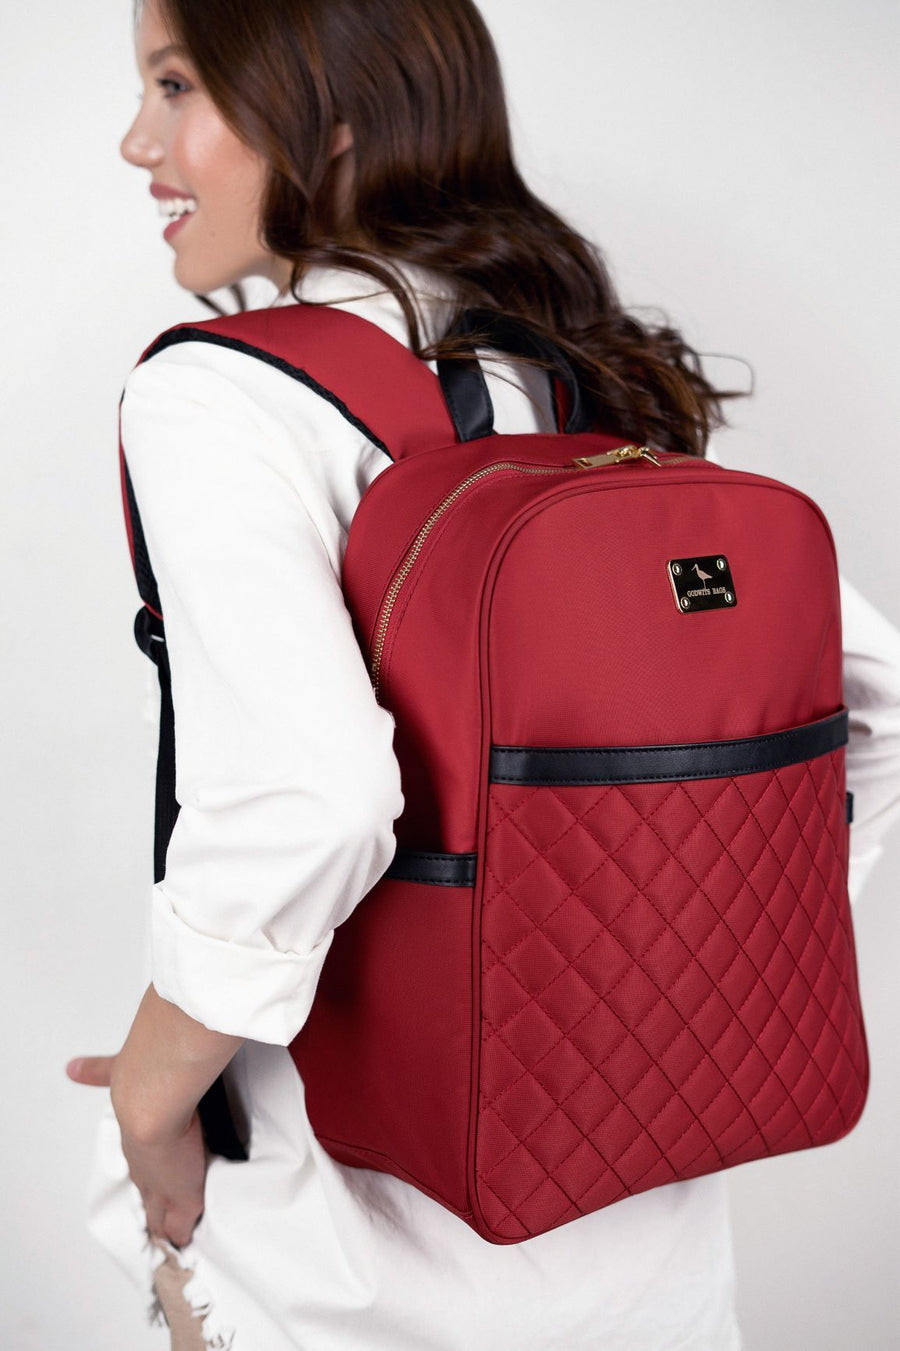 Red Women's Backpack.